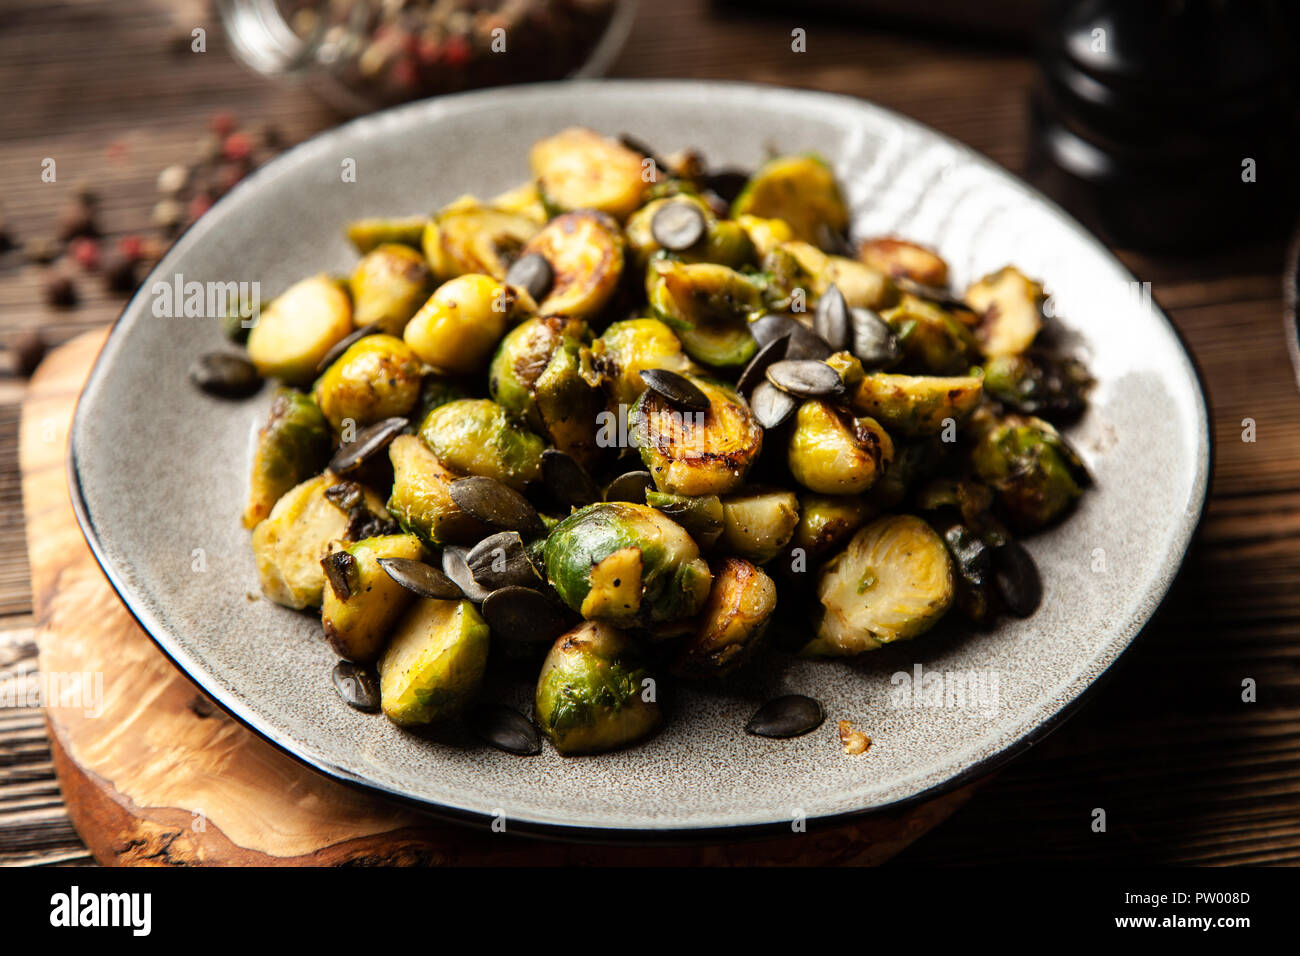 Honey roasted brussles sprouts with pumpkin seeds Stock Photo